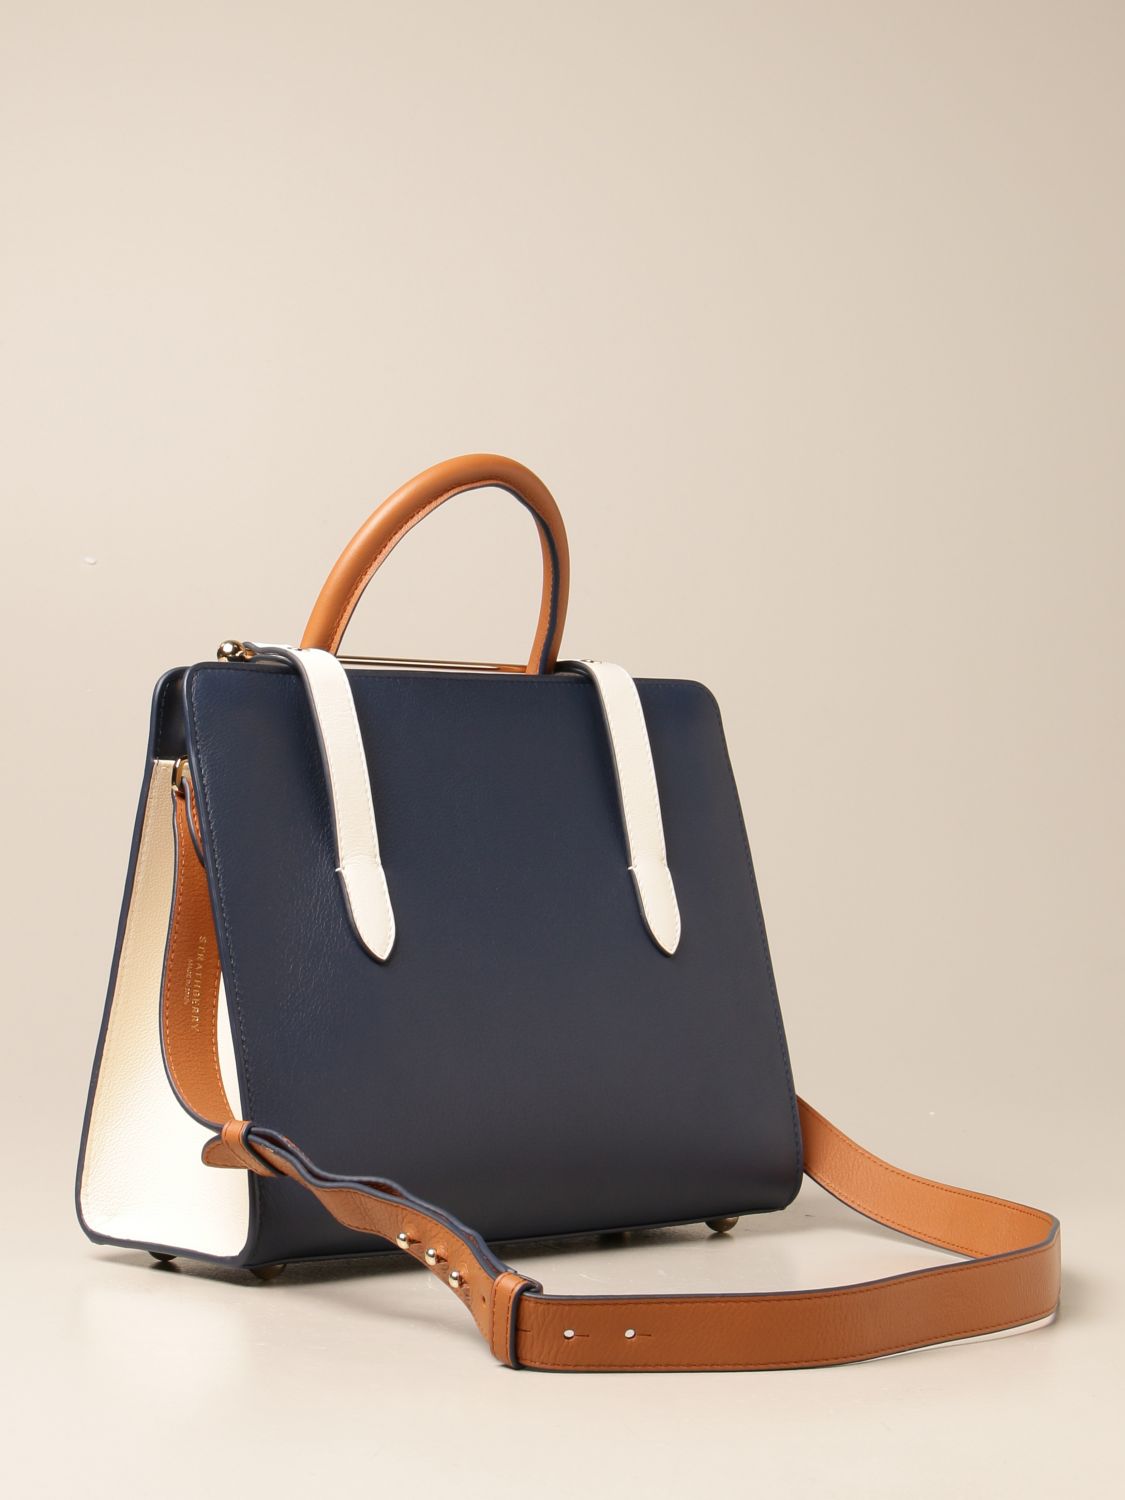 STRATHBERRY: Midi Tote bag in tricolor leather - Navy  Strathberry  shoulder bag MIDI TOTE (TS) - W online at